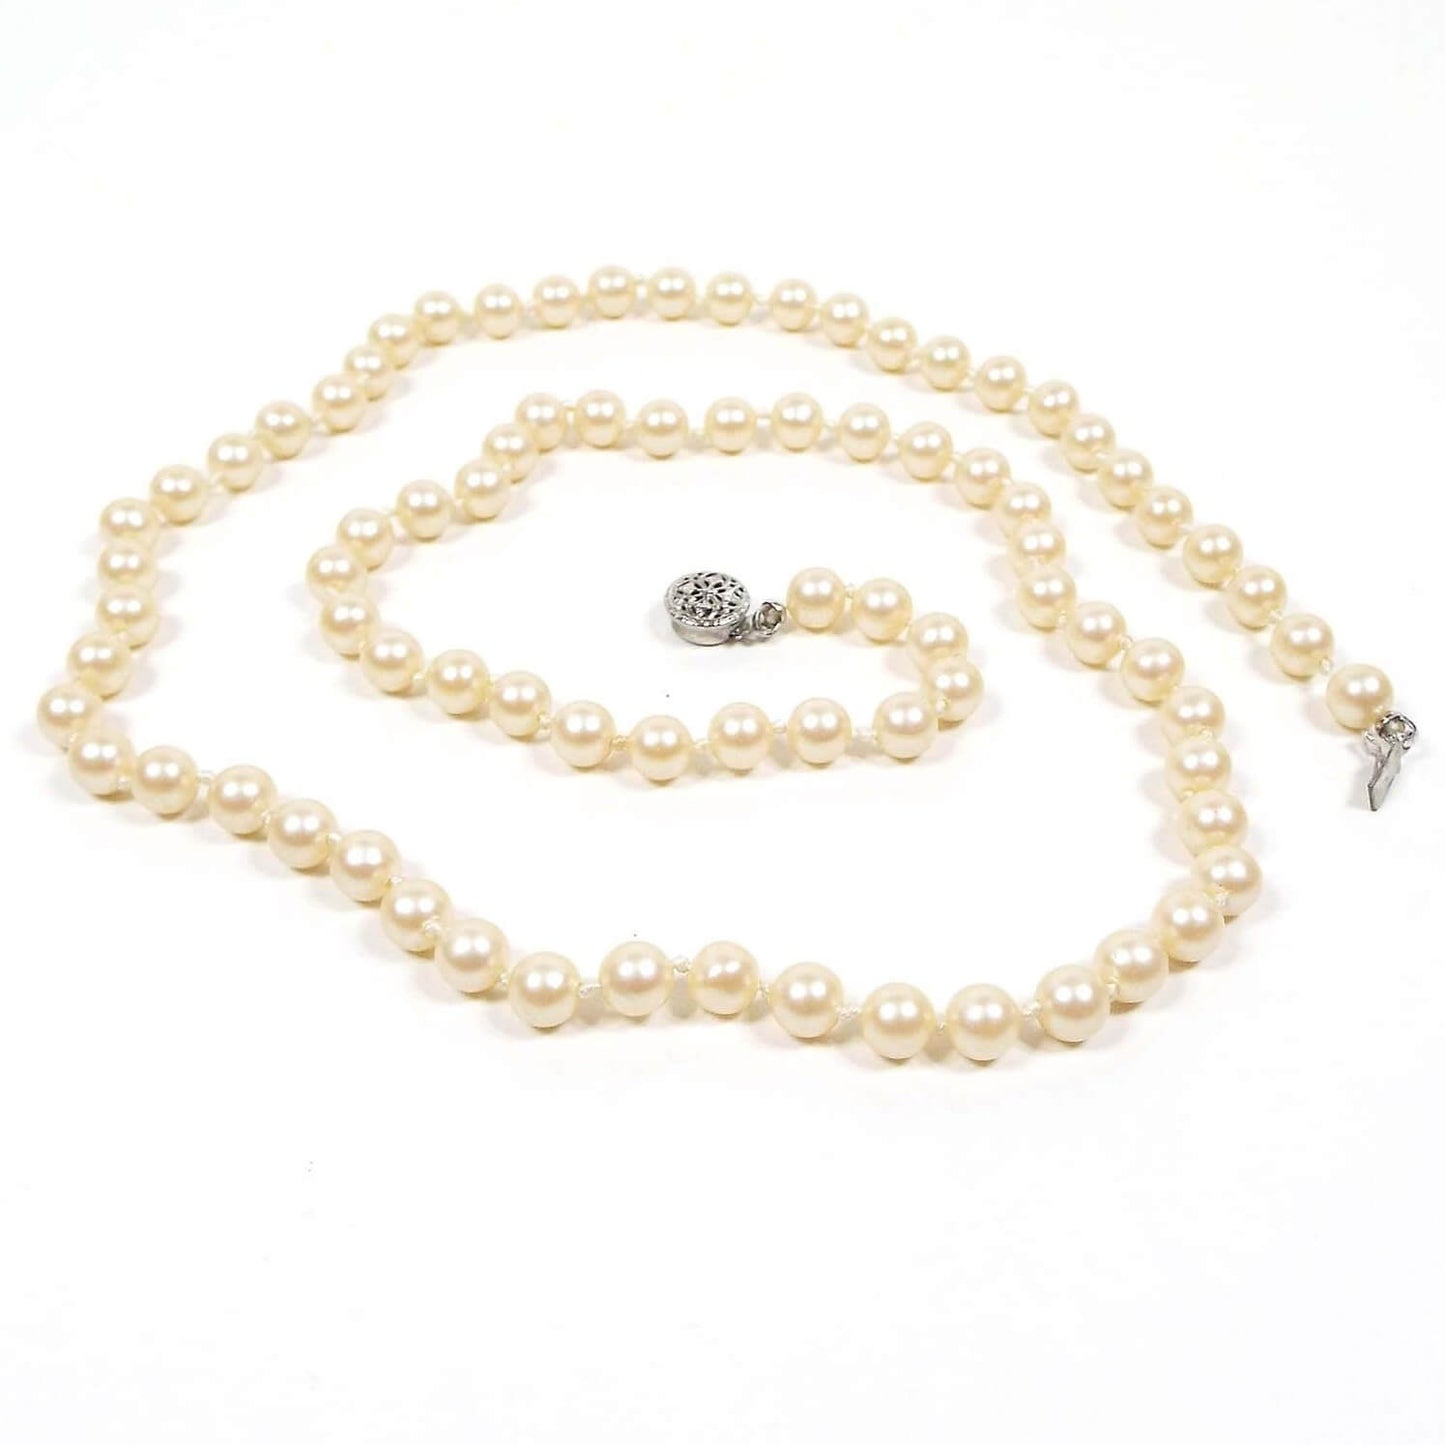 Top view of the Mid Century vintage faux pearl necklace. It is one strand of coated plastic round beads in an off white golden yellow color. The beads are have knots in between them. There is a silver tone filigree box clasp at the end.